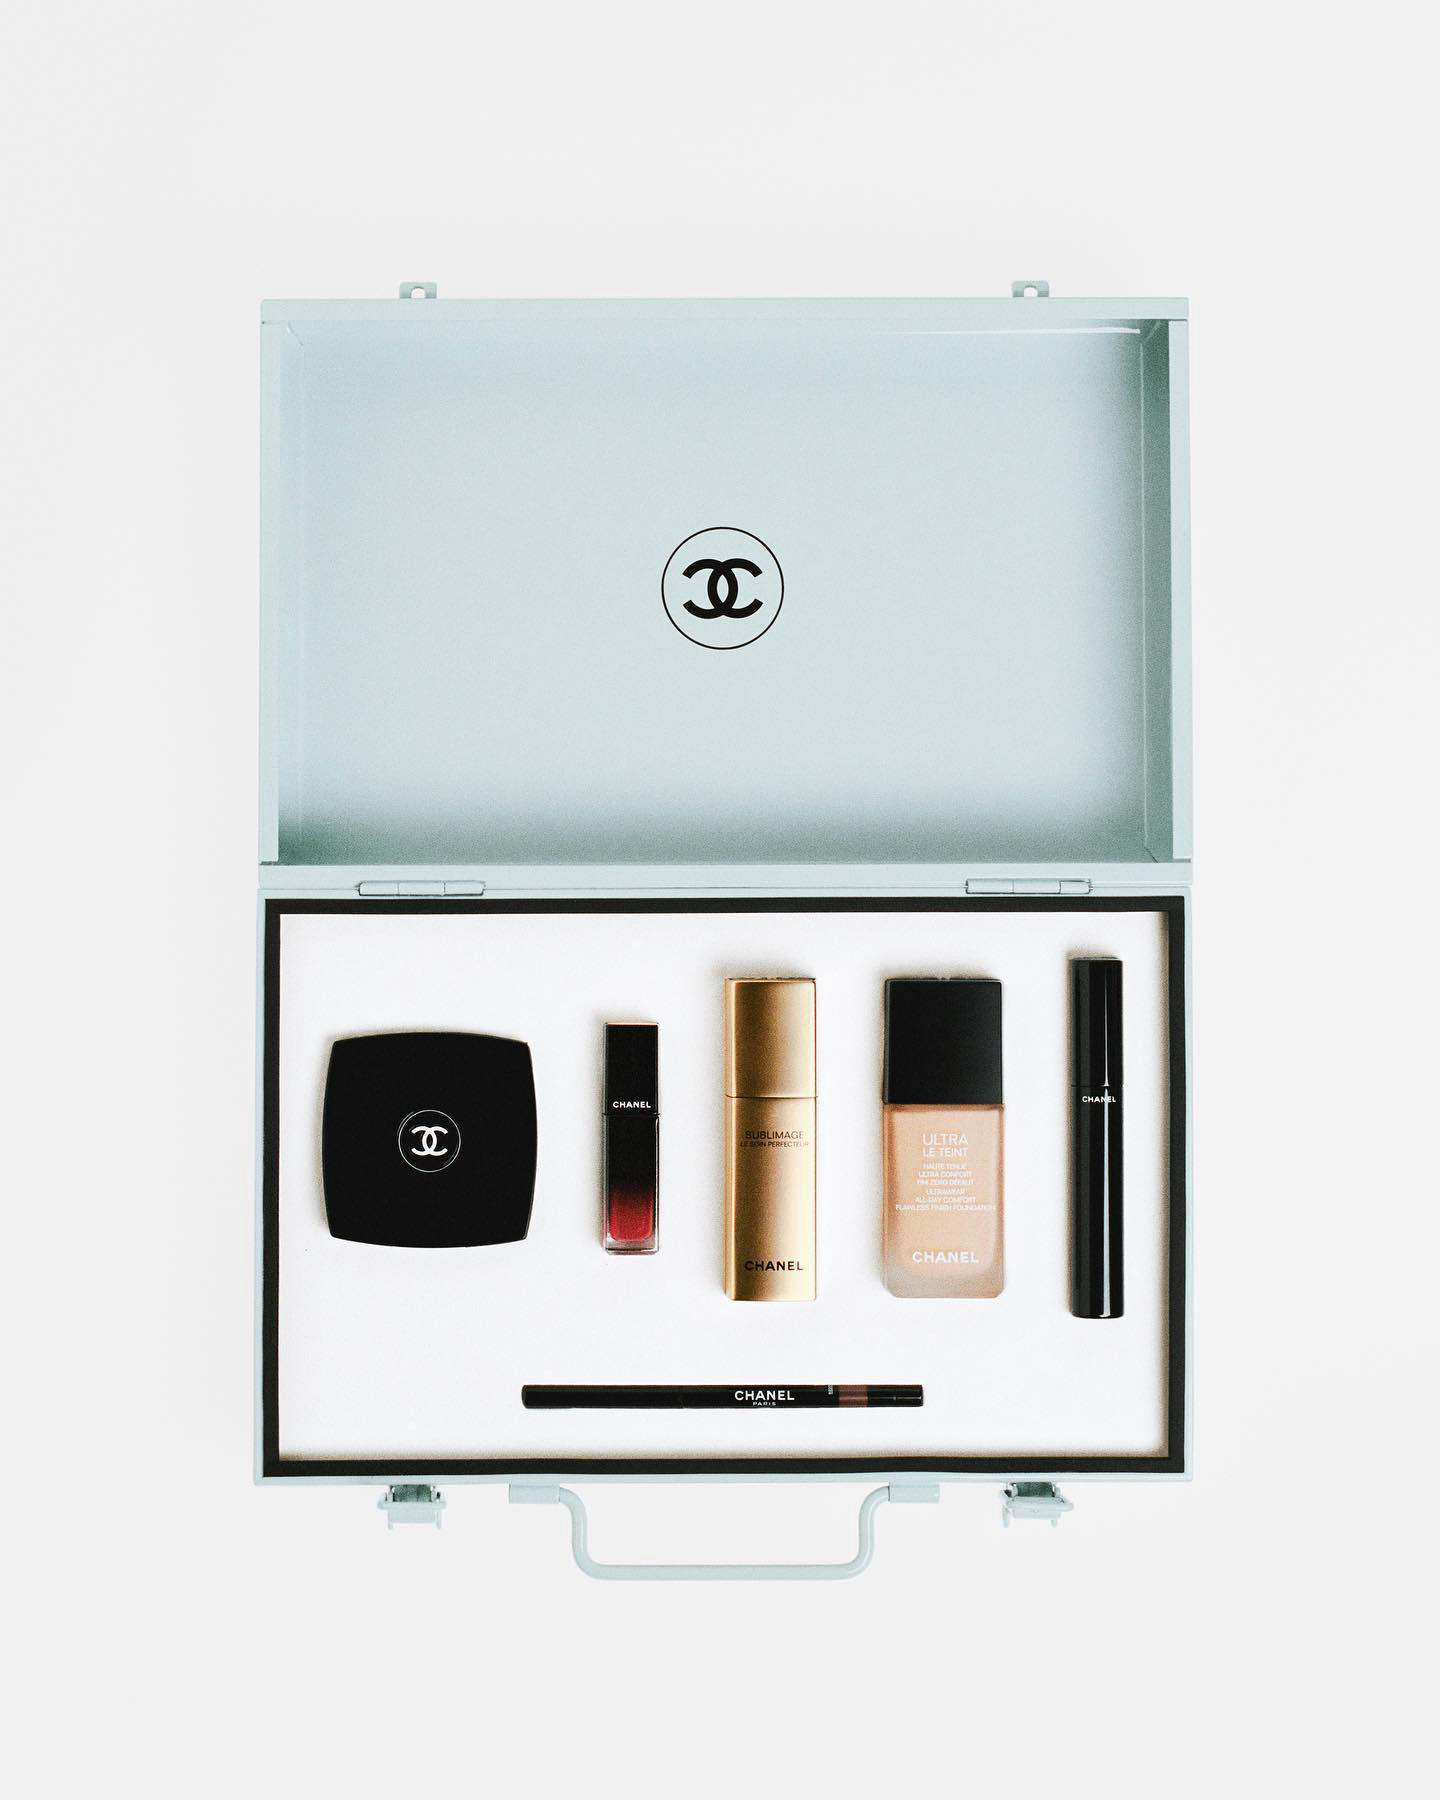 CHANEL BEAUTY EMERGENCY – Rain KitLove the rain with these CHANEL Beauty essentials